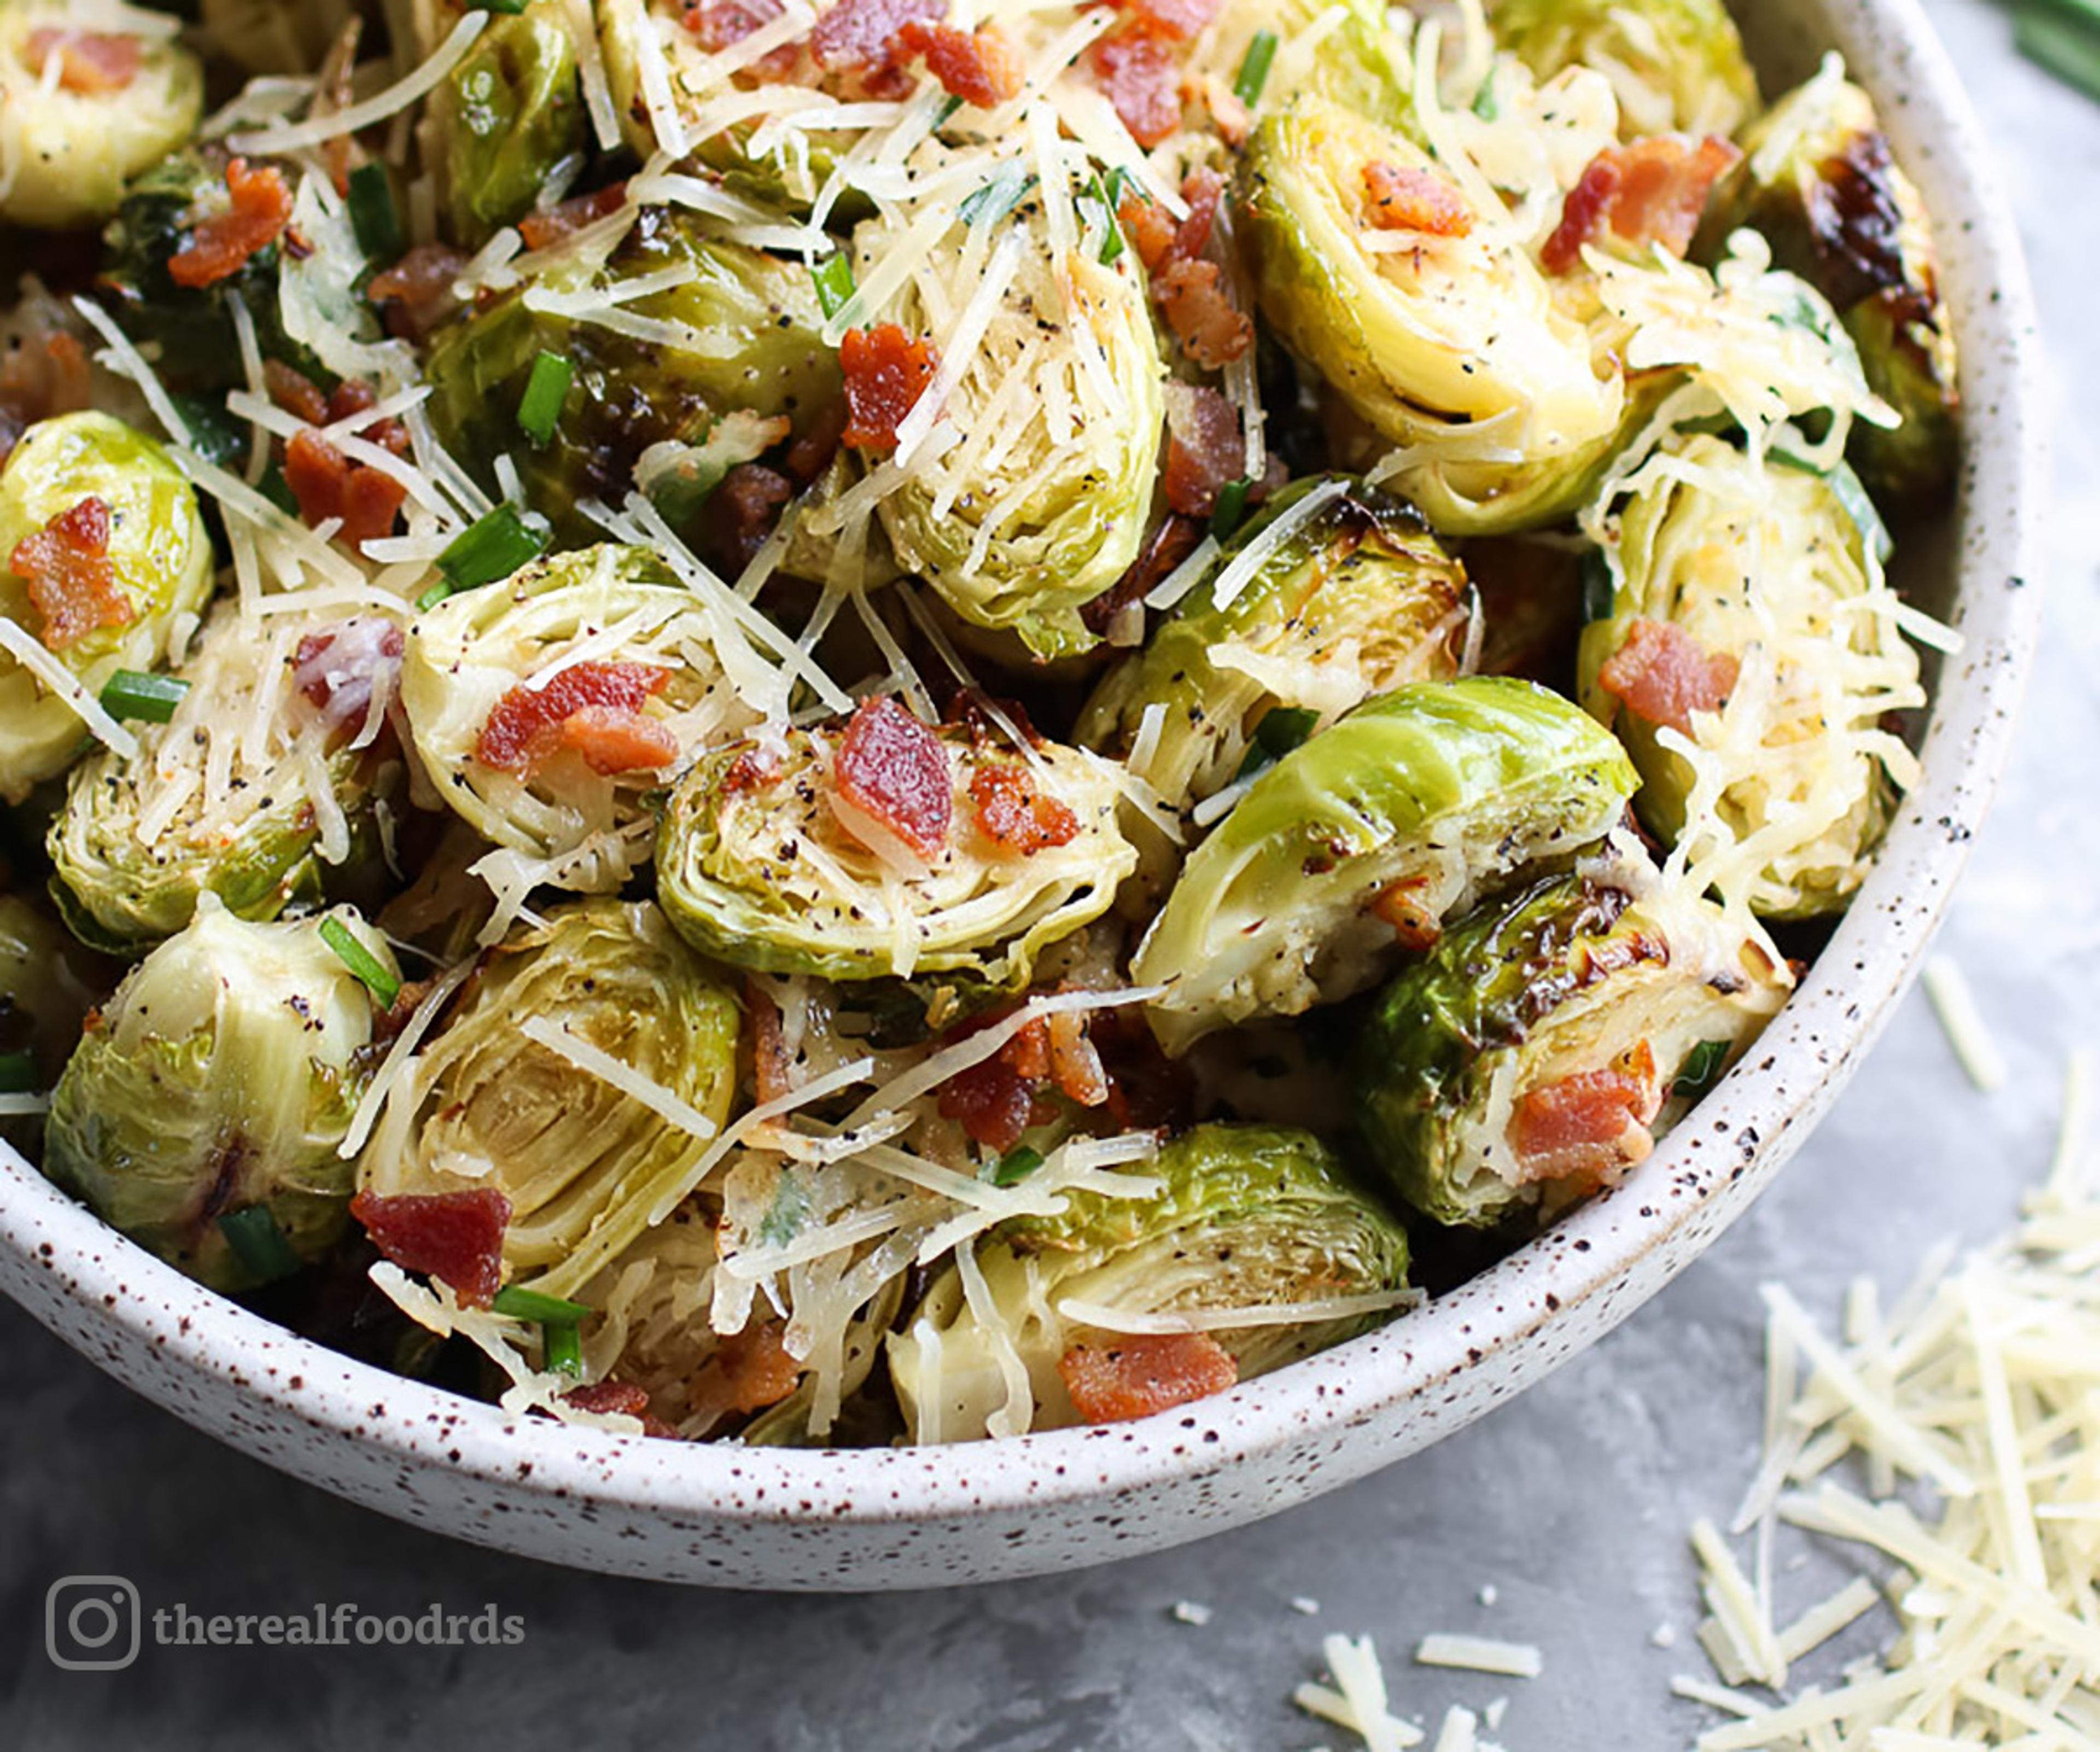 Parmesan Roasted Brussels Sprouts with Bacon. Recipe and photo by the Real Food Dietitians.